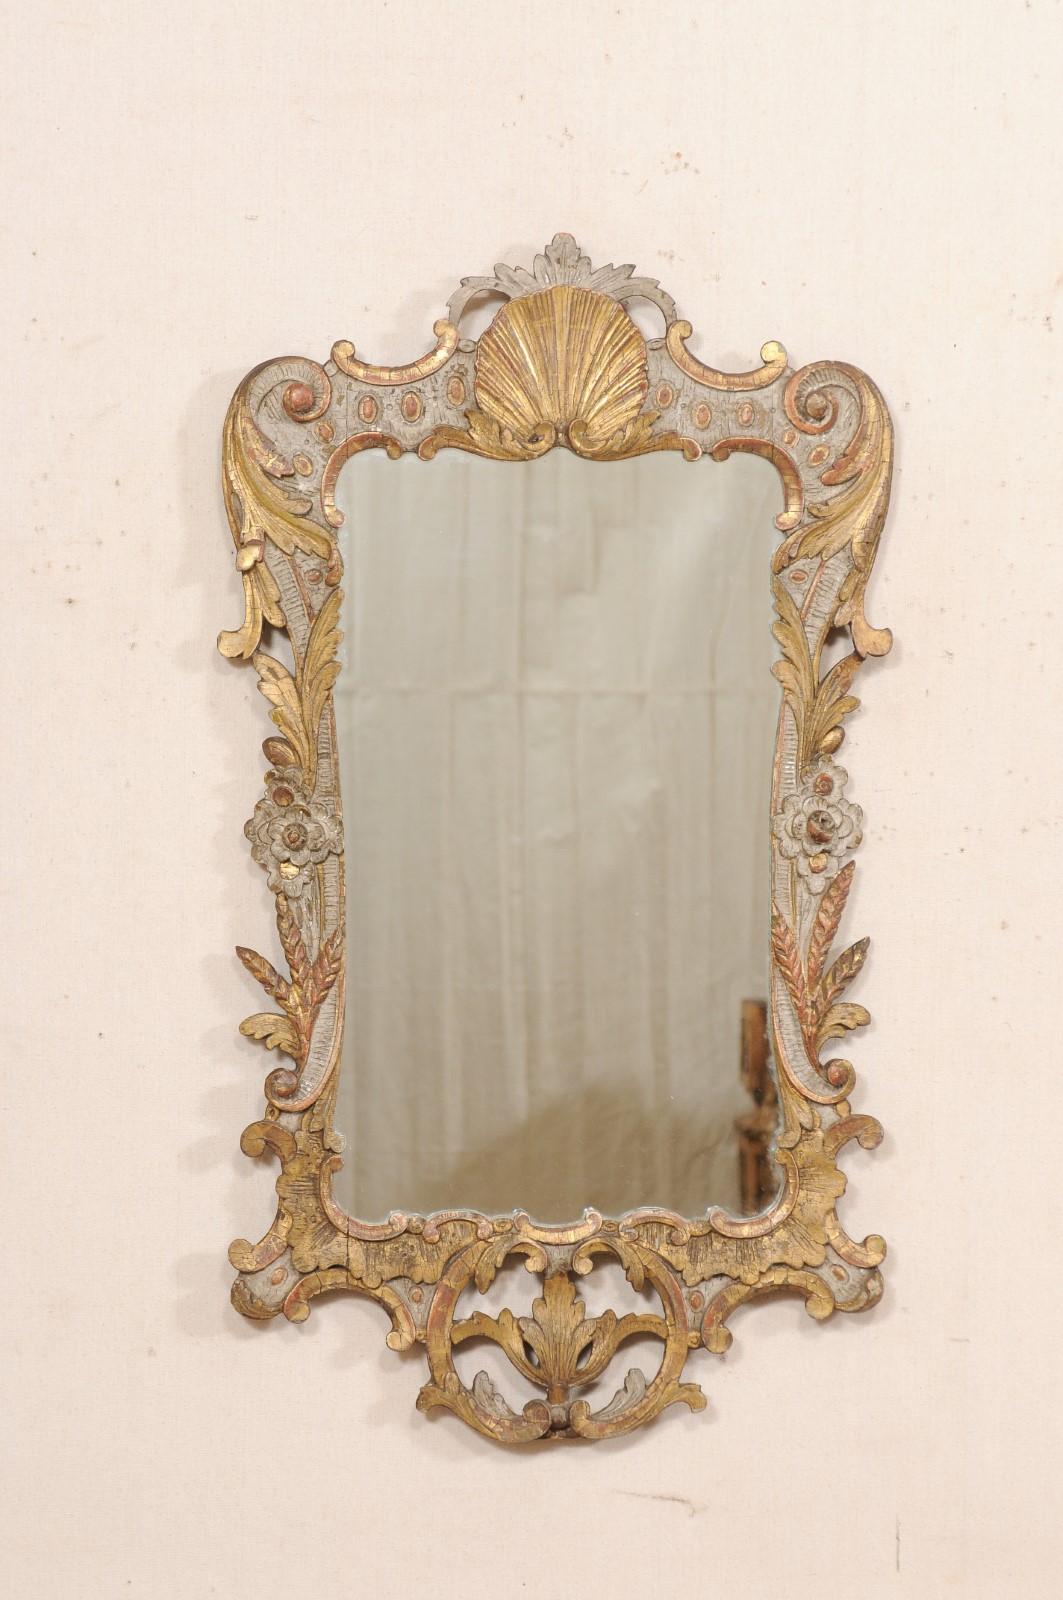 A French Georgian style carved wood mirror, with its original finish, from the turn of the 18th and 19th century. This antique mirror from France, designed with Georgian influences, features a beautifully pierce-carved wood surround in a shell and